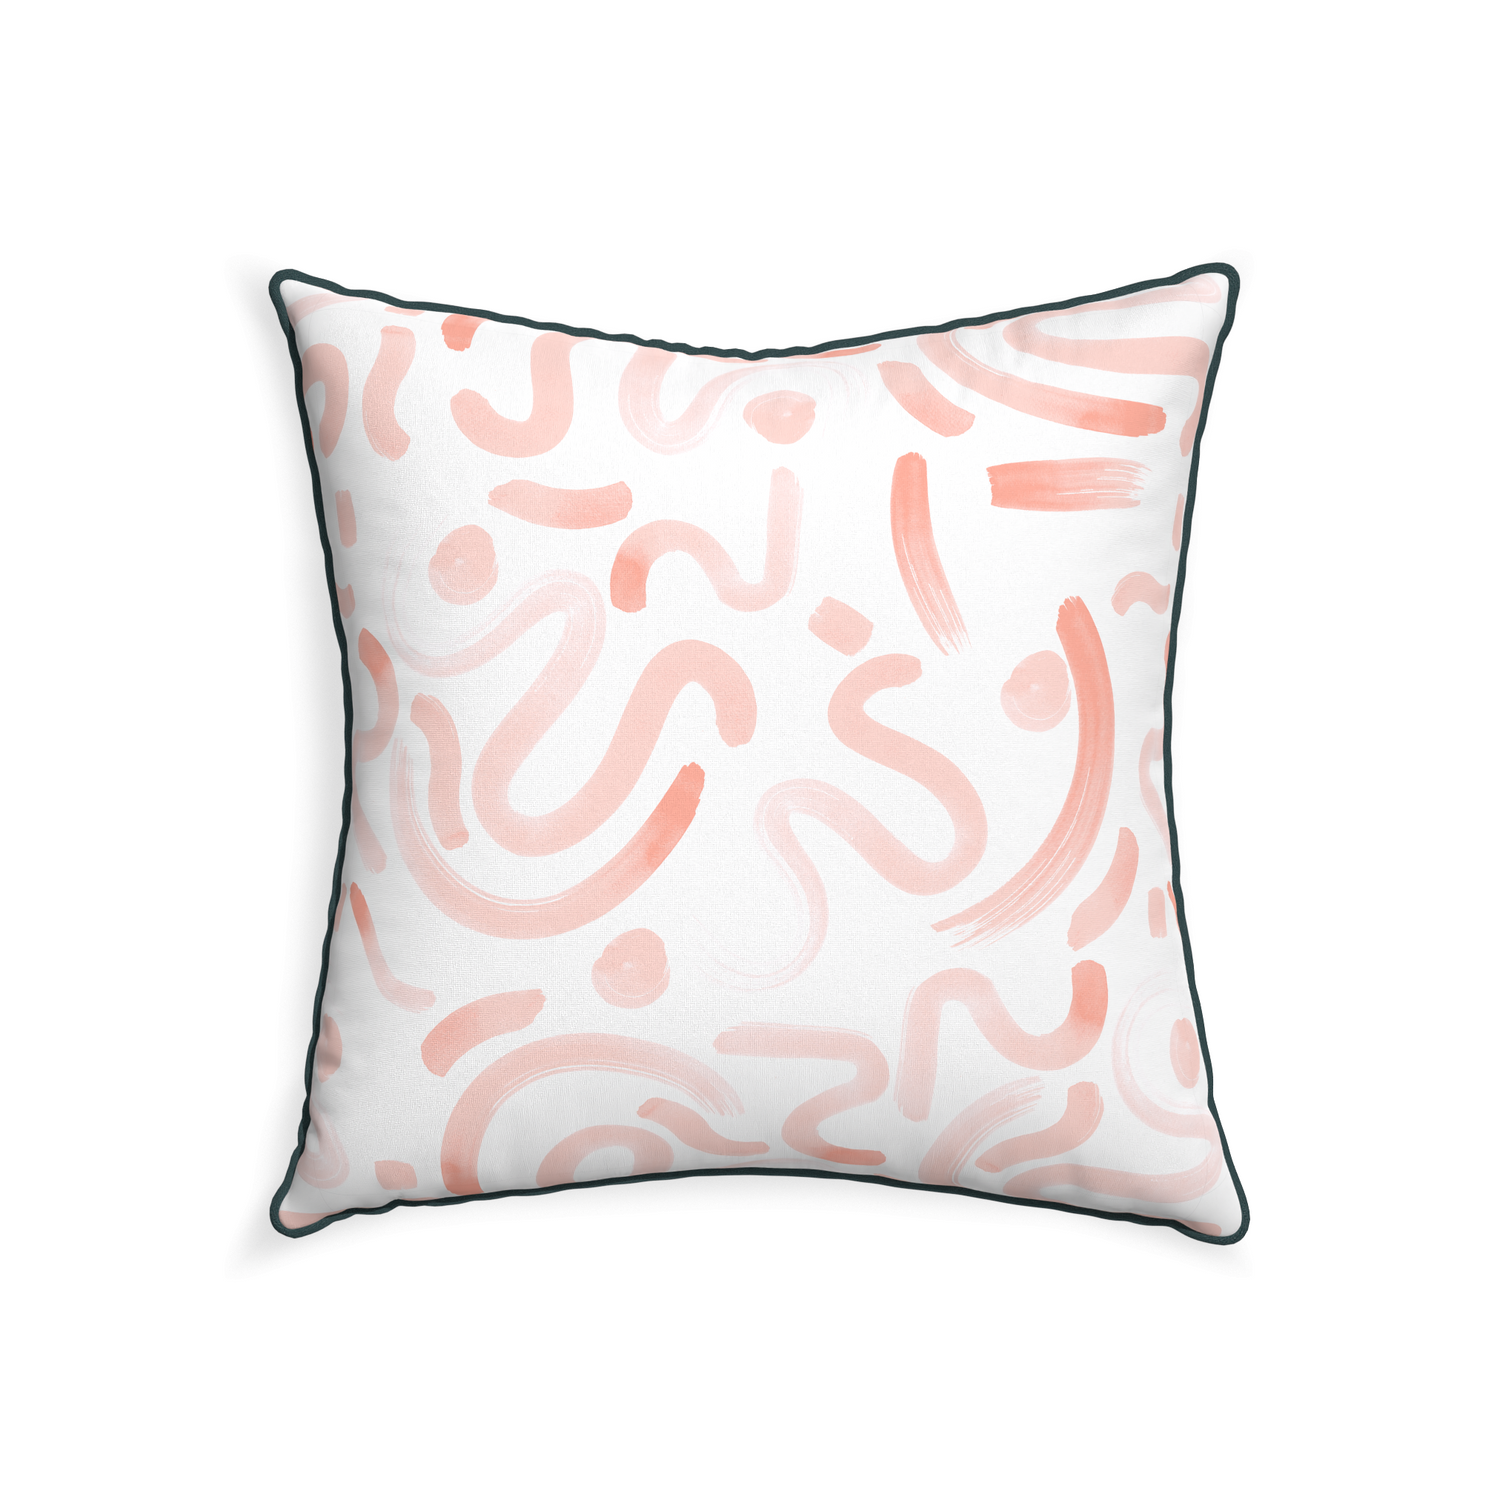 22-square hockney pink custom pink graphicpillow with p piping on white background